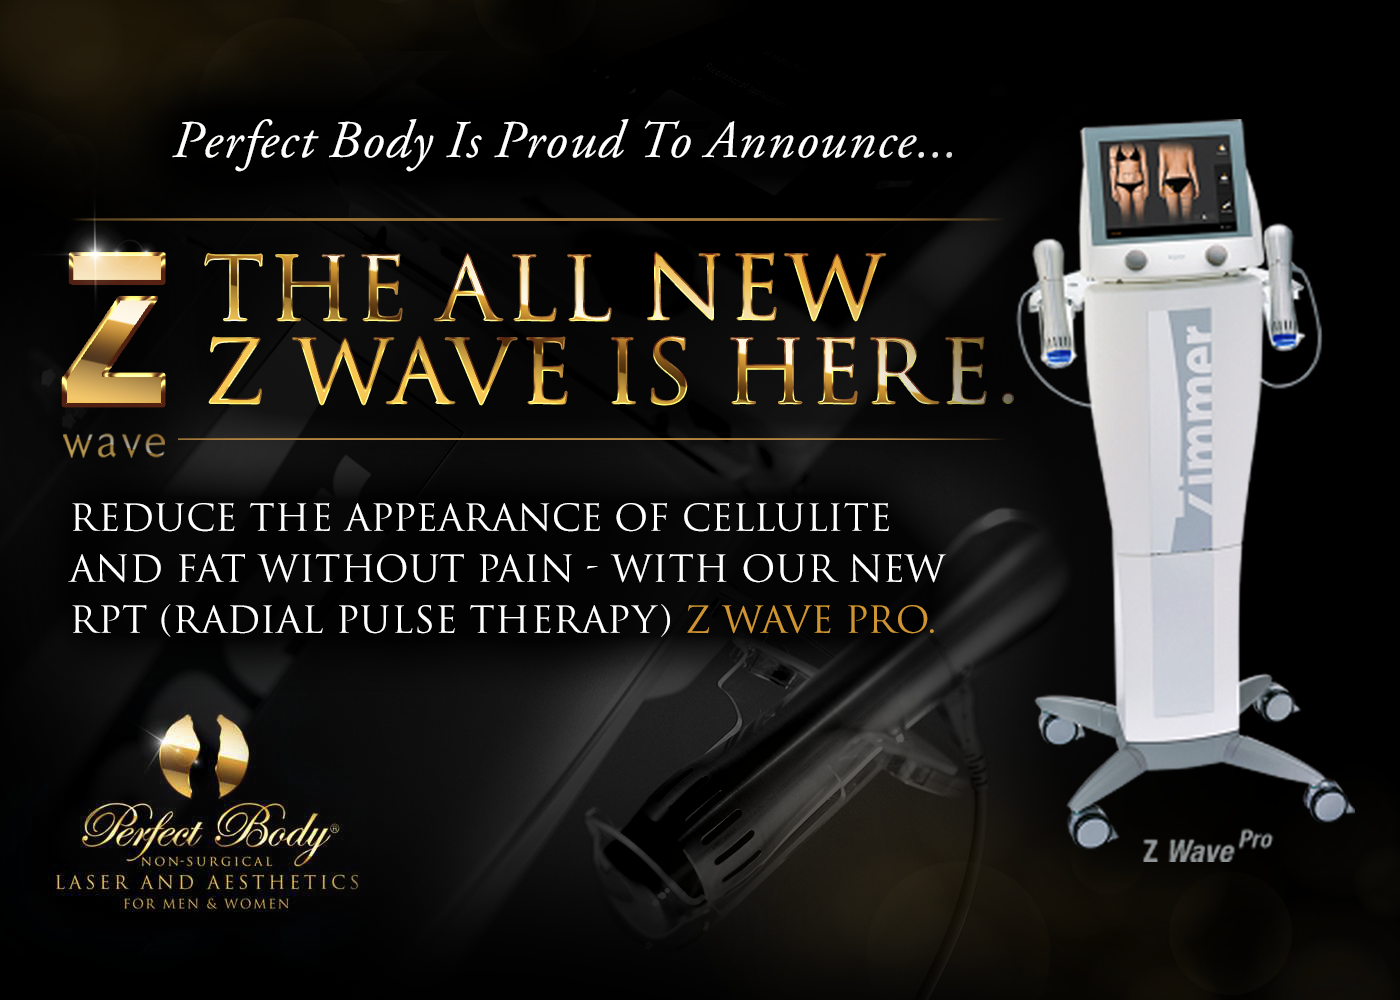 Z Wave Pro Cellulite Reduction Shock Wave Therapy Treatment is now at Perfect Body Laser!